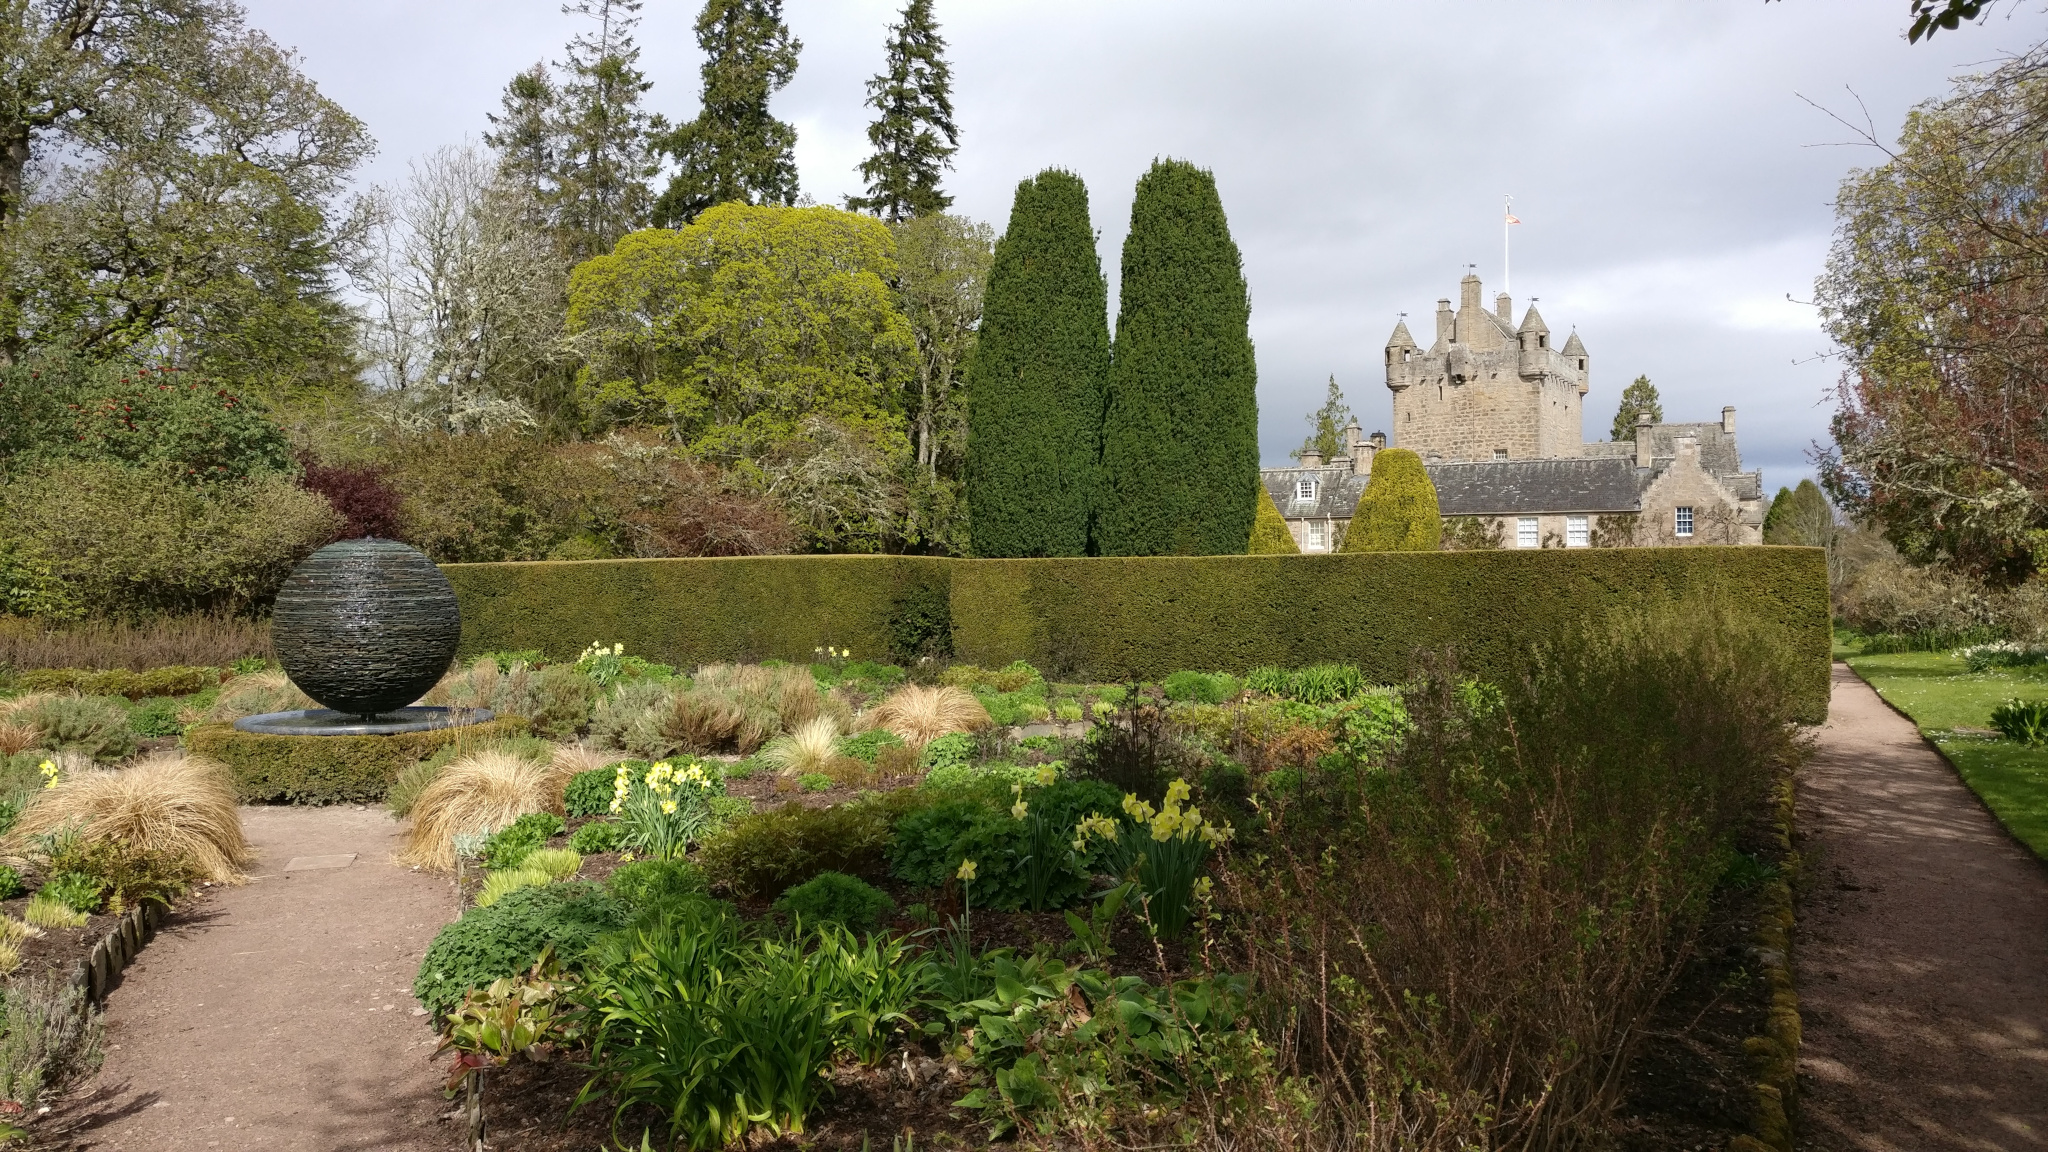 The gardens of Cawdor Castle, with the main building behind